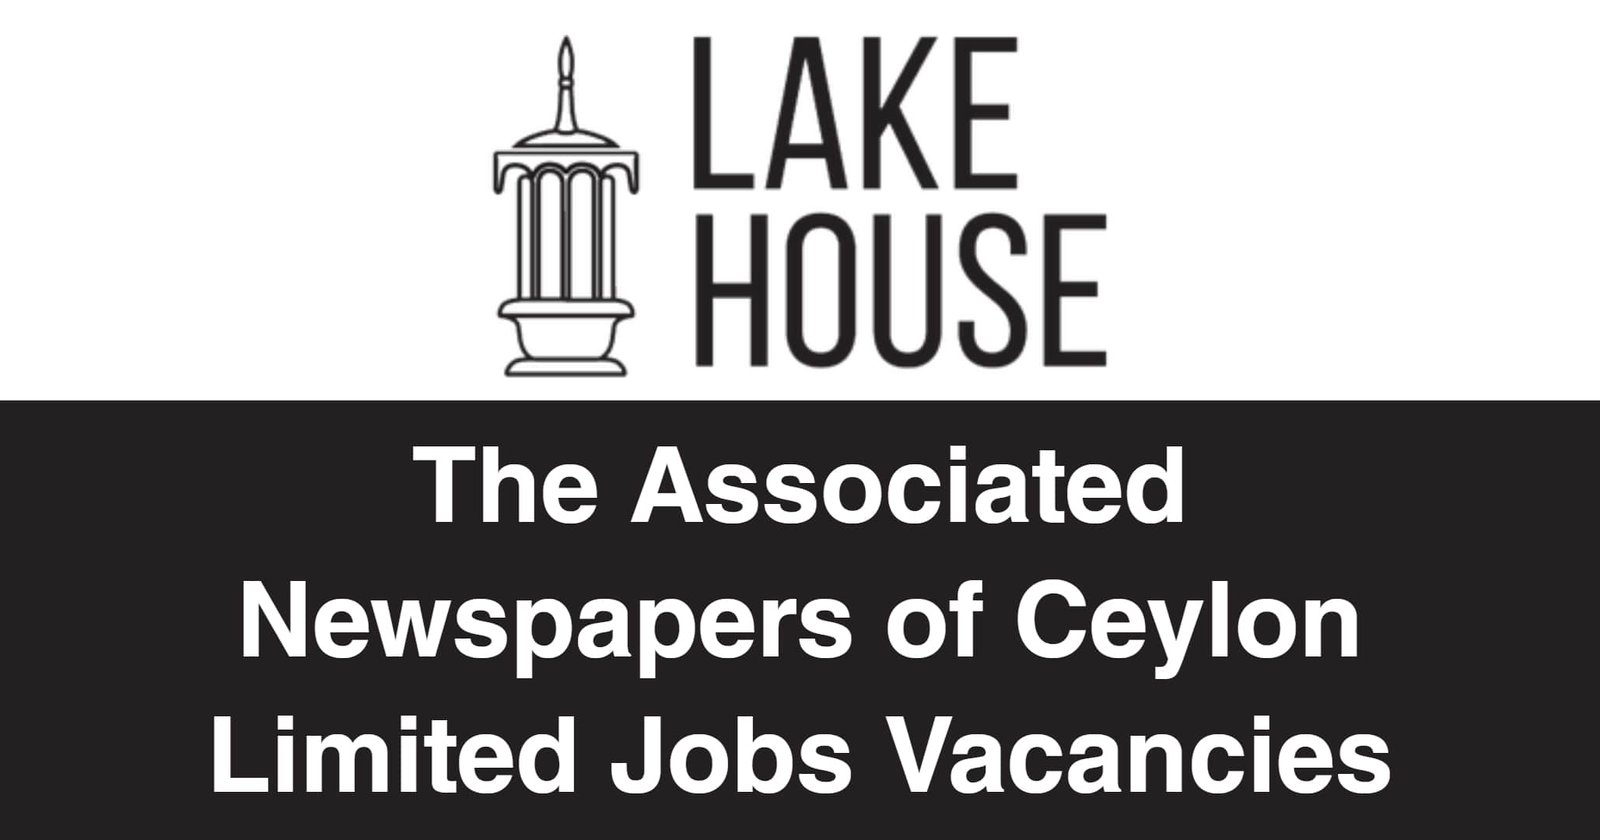 The Associated Newspapers of Ceylon Limited Jobs Vacancies